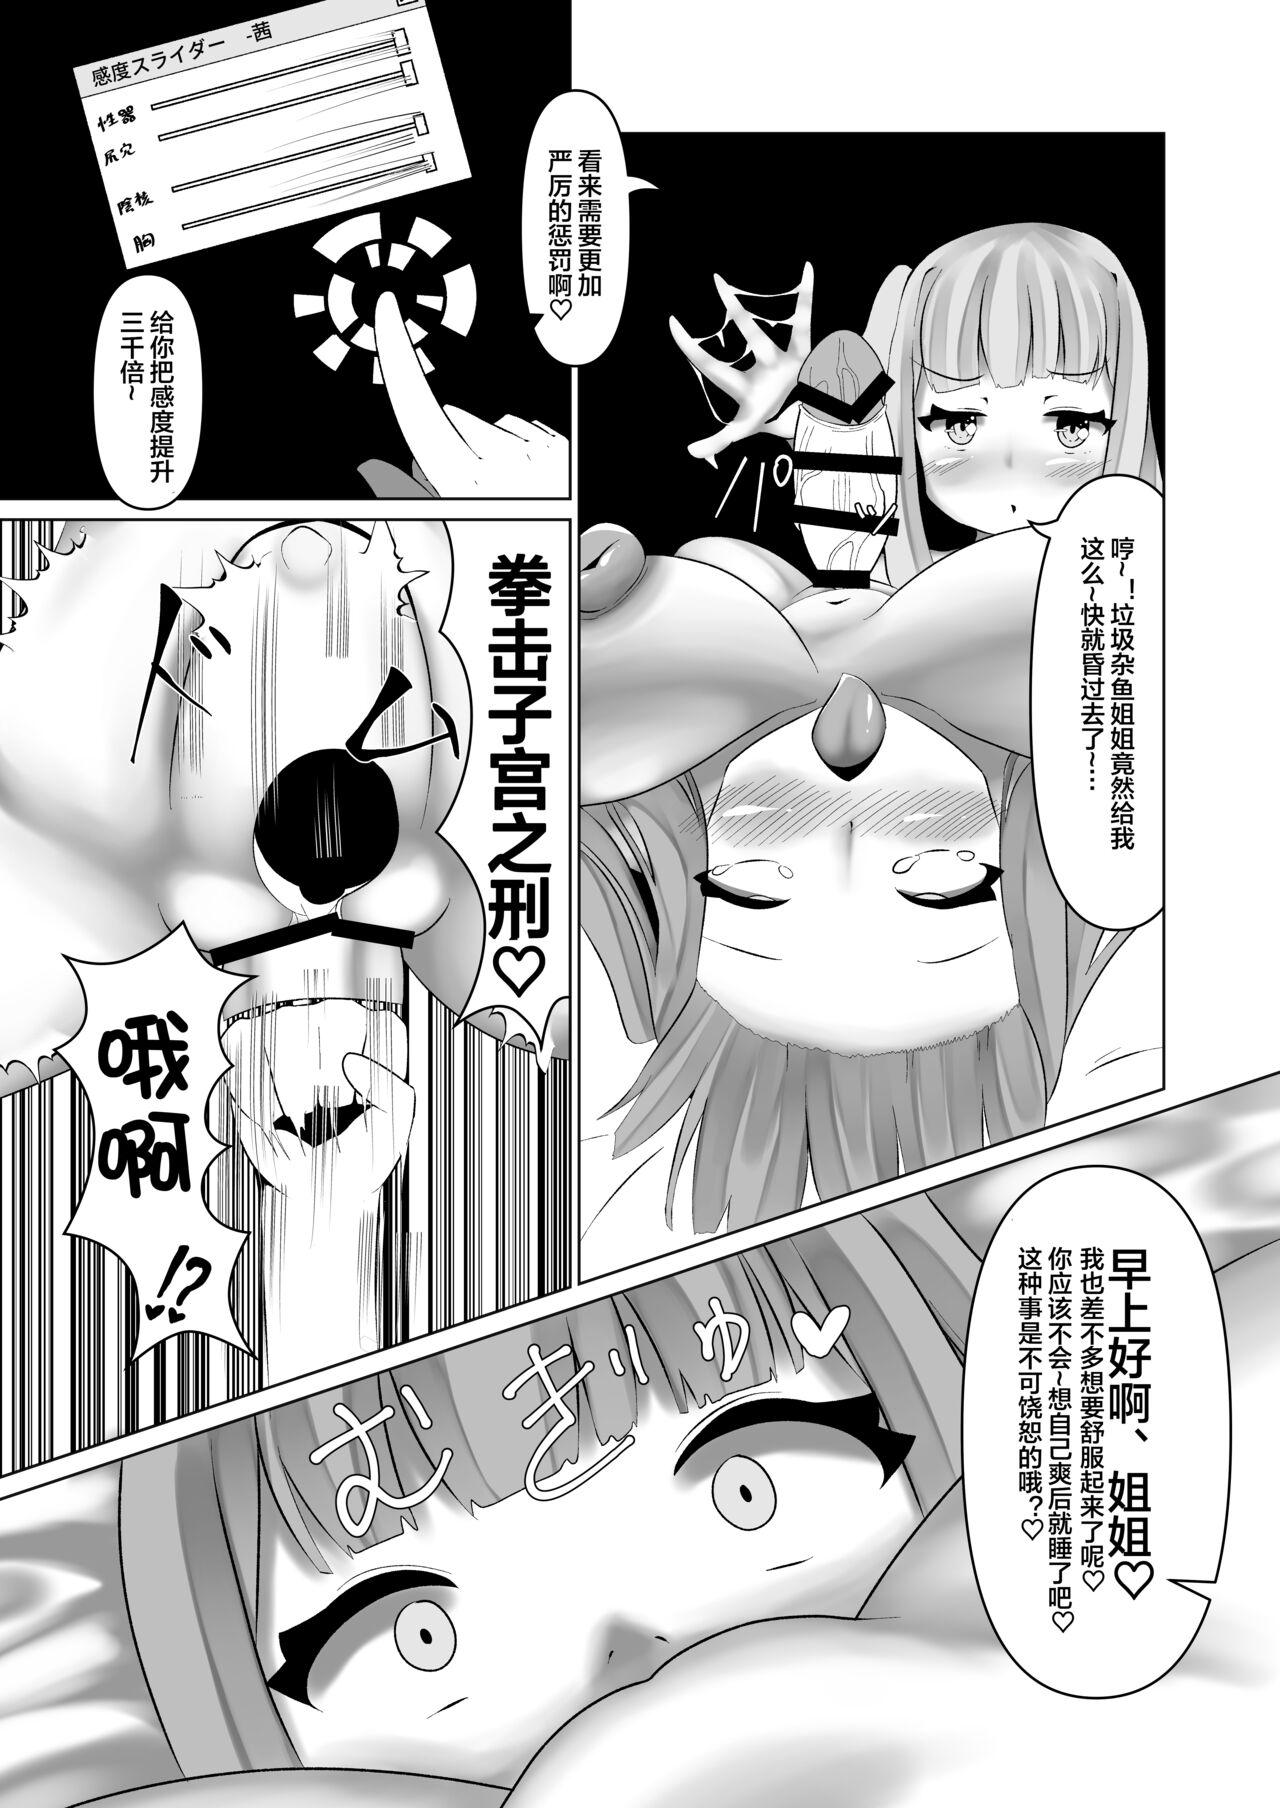 Best Blowjob 葵ちゃんの性処理玩具 - Voiceroid 19yo - Page 9